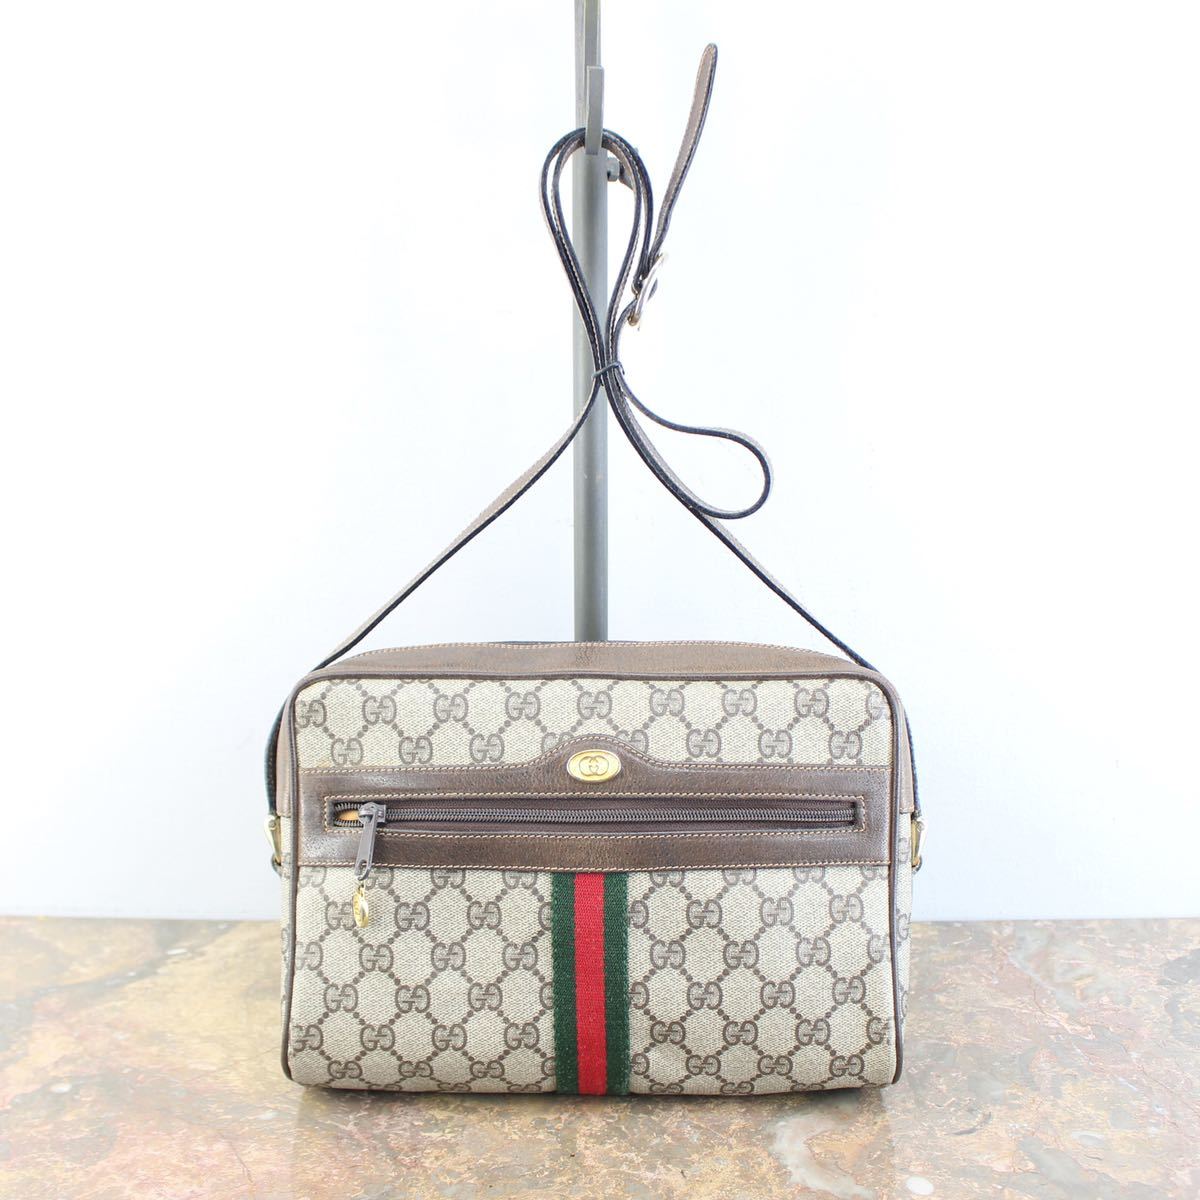 OLD GUCCI GG PATTERNED SHERRY LINE SHOULDER BAG MADE IN ITALY